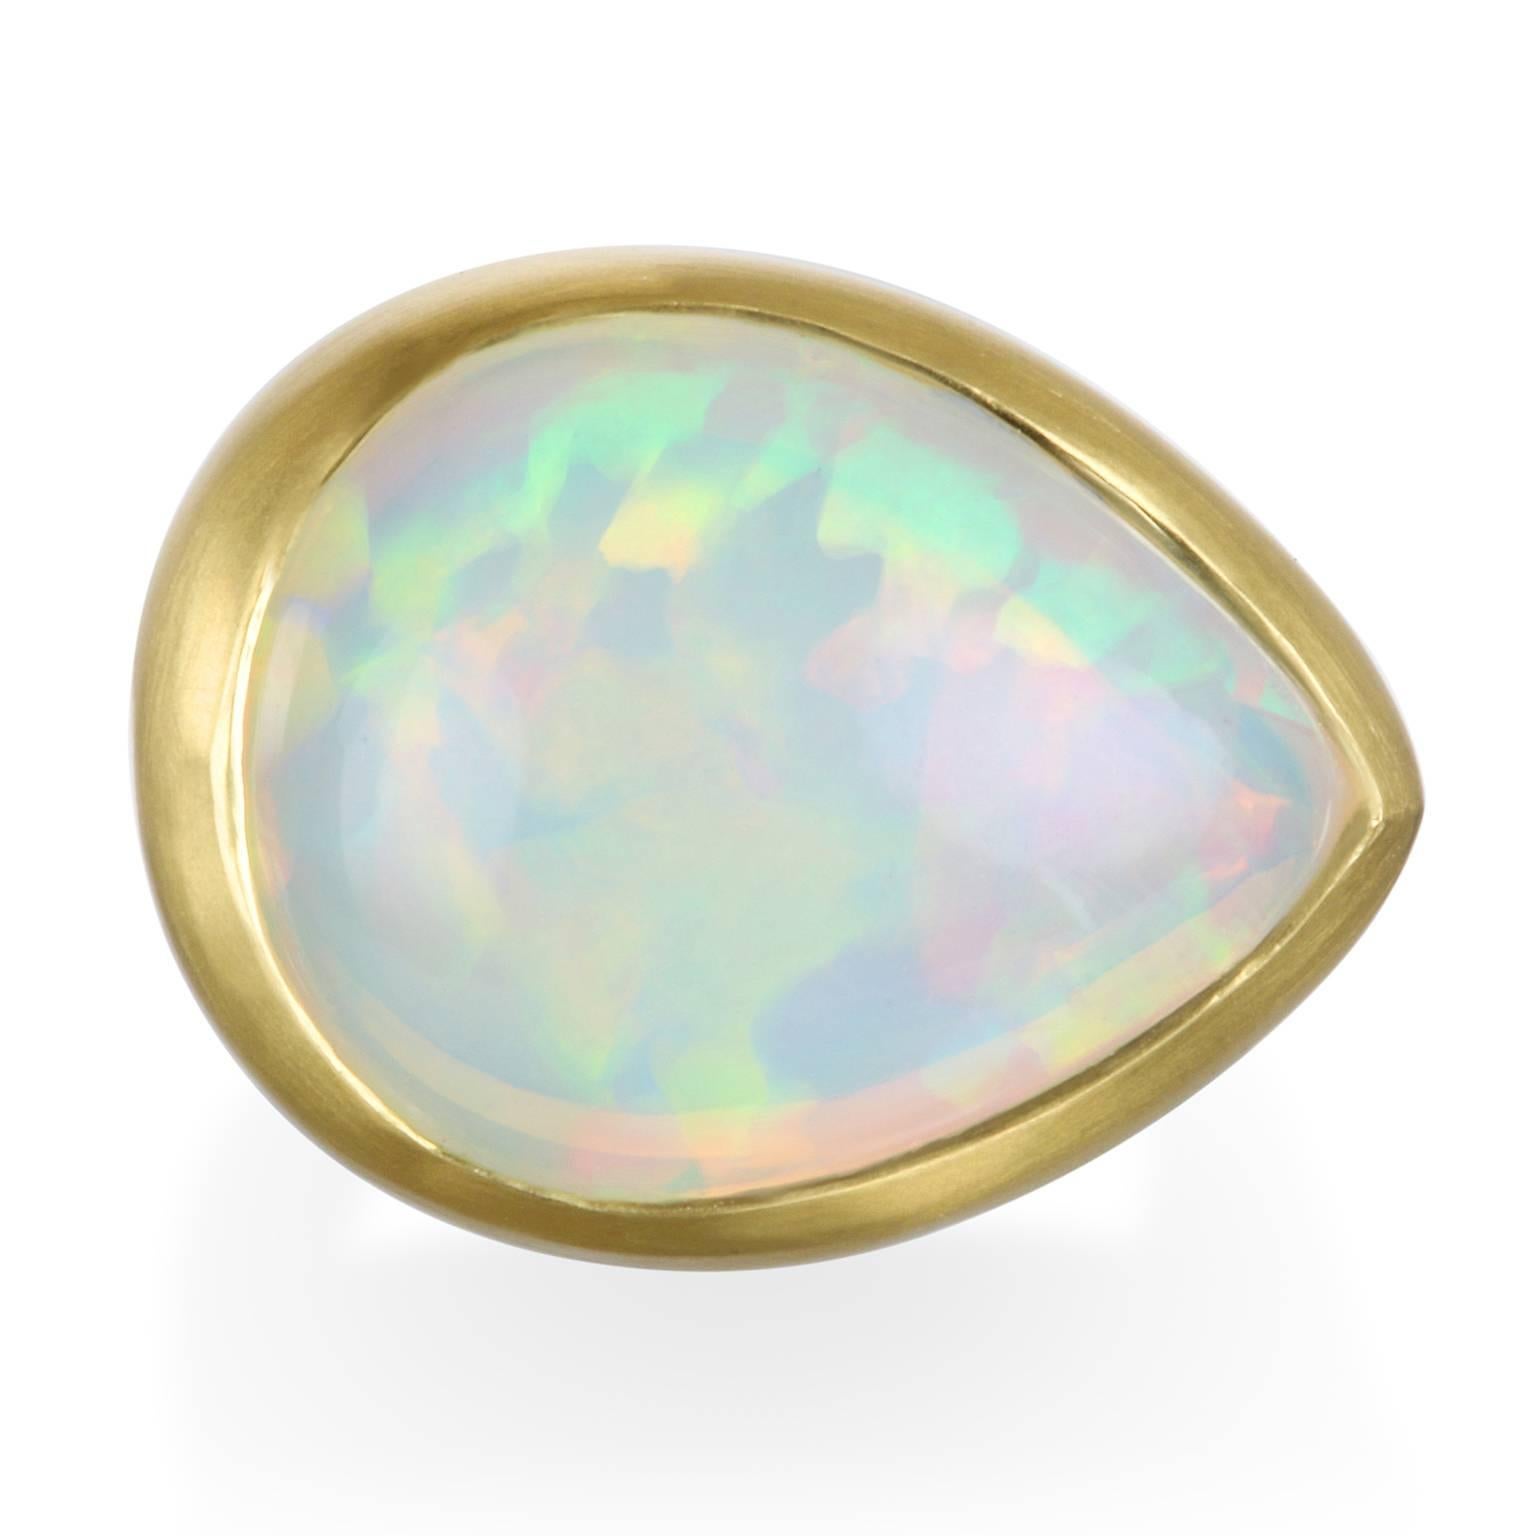 Spectacular in size and color, the pear shape Ethiopian Opal is set in 18k matte green gold to further enhance its play of color.  The ring is skillfully handcrafted for beauty and comfort - the ultimate modern-day cocktail ring.

Ring Size: